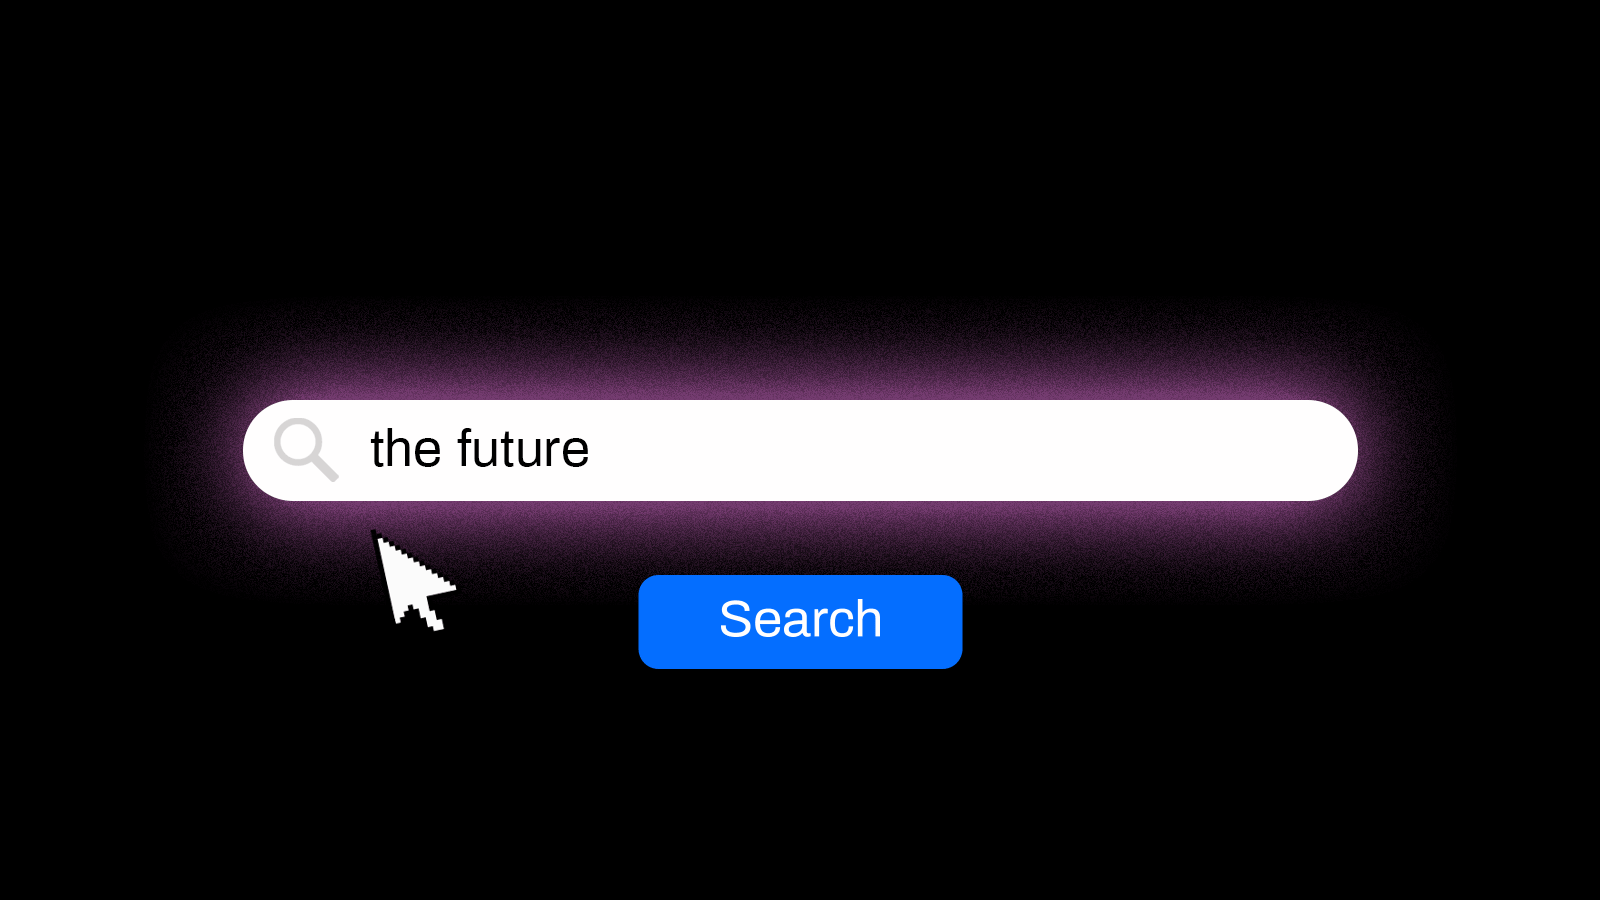 A search bar with the phrase "the future" being typed and a blue search button below it. An arrow cursor points to the search phrase. The background is black.